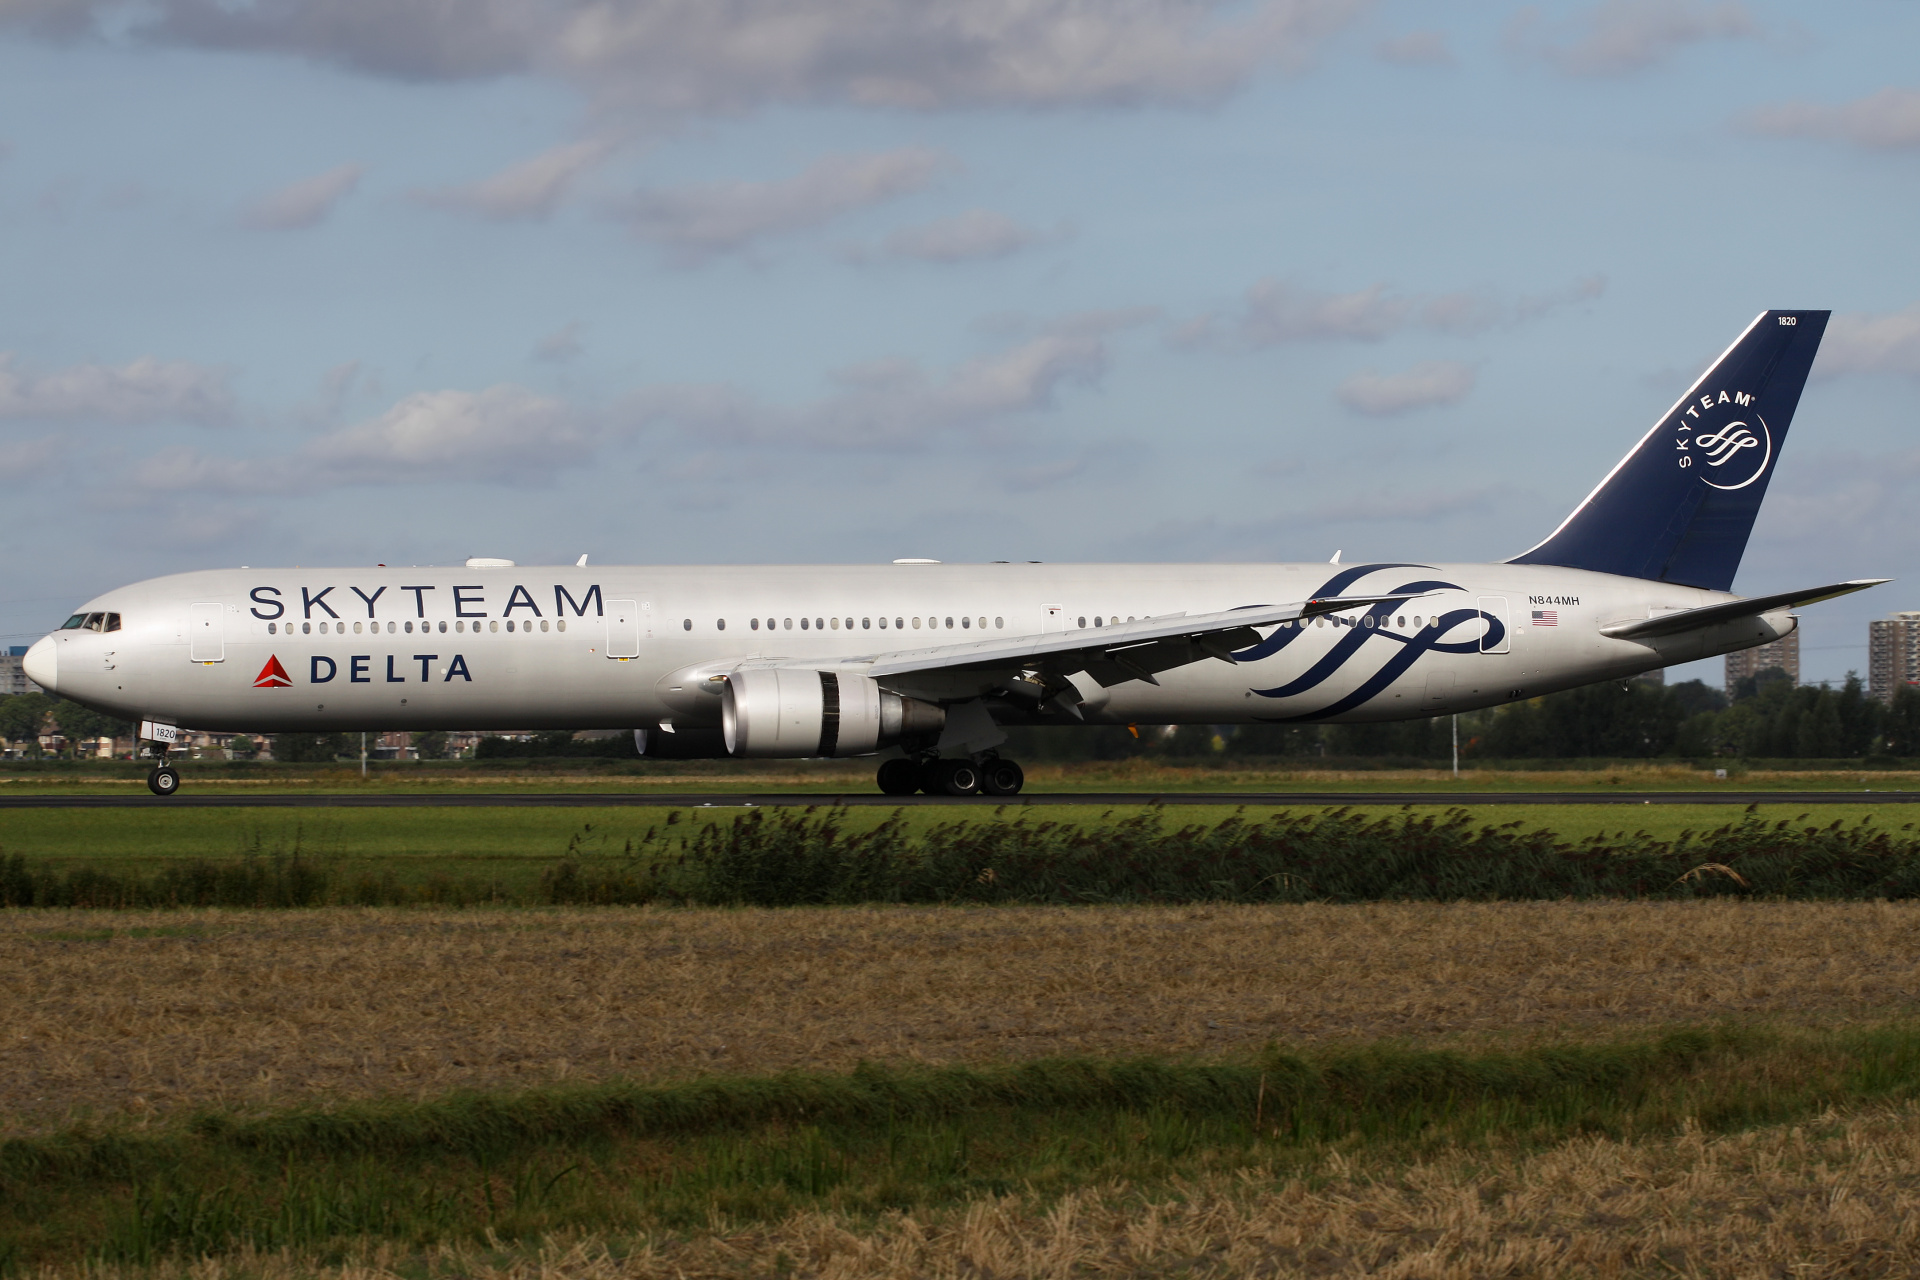 N844MH, Delta Airlines (SkyTeam livery) (Aircraft » Schiphol Spotting » Boeing 767-400)